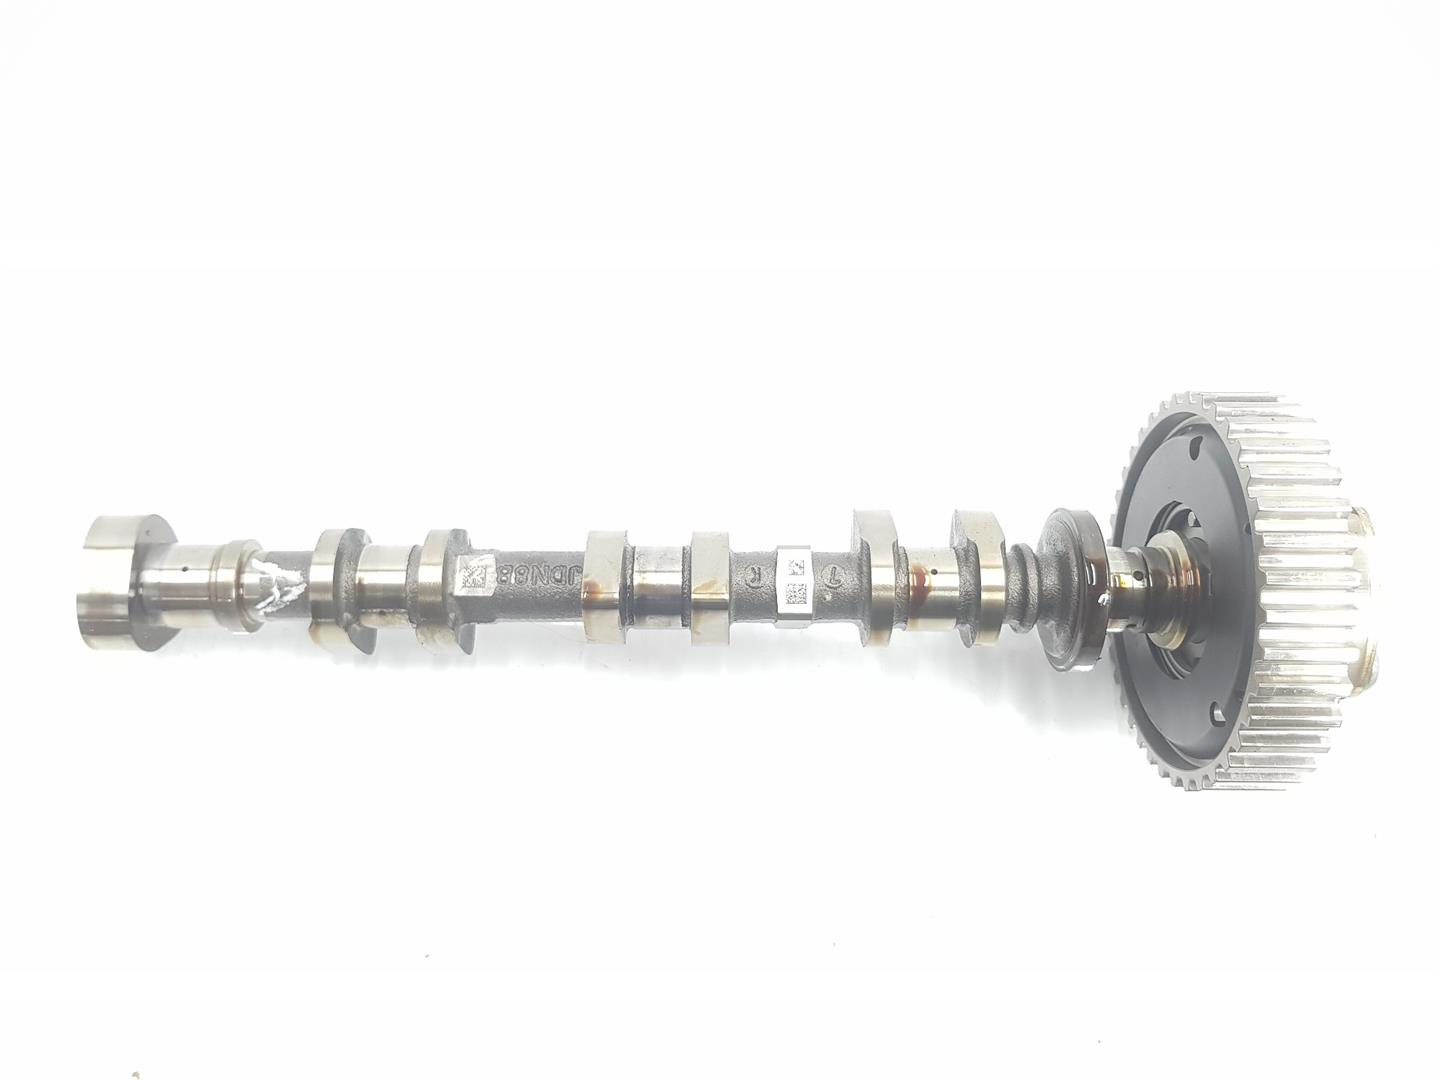 FORD C-Max 2 generation (2010-2019) Exhaust Camshaft 2300725, M1JU, ADMISION 19921944